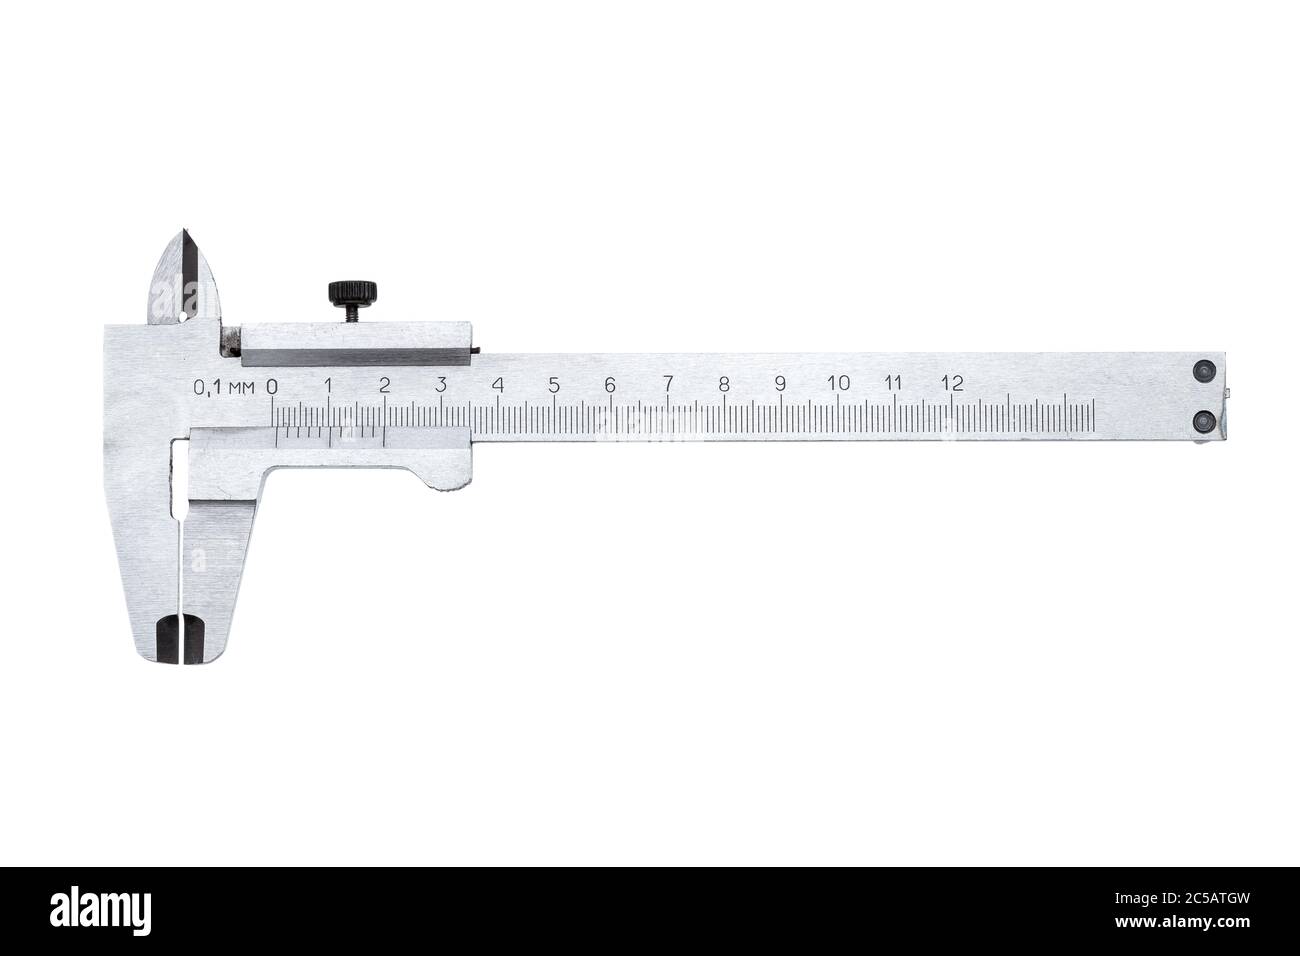 vernier caliper engineering tool for measuring sizes, object isolated on a white background. Stock Photo